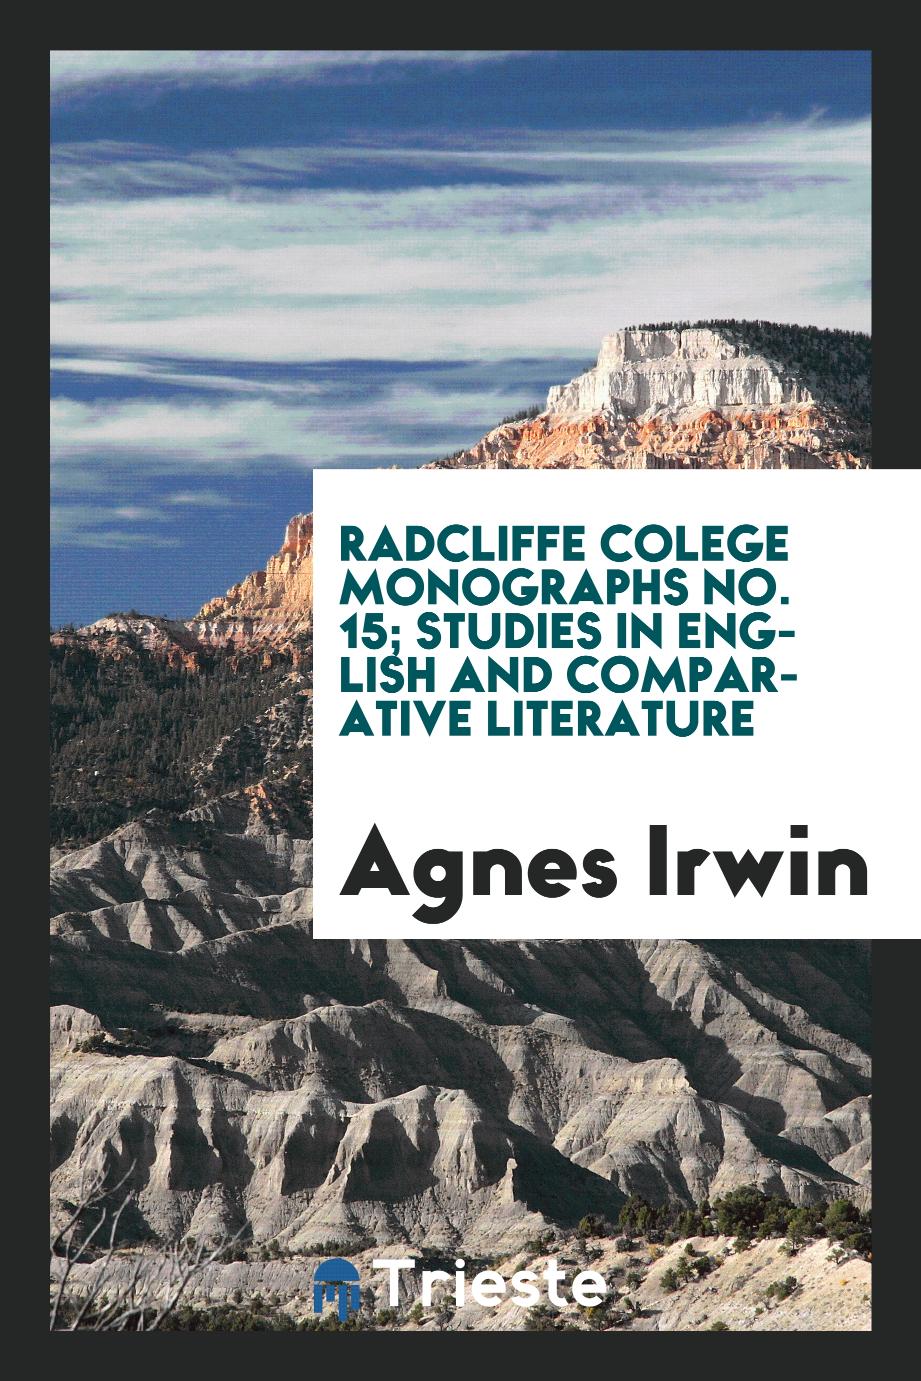 Radcliffe Colege Monographs No. 15; Studies in English and Comparative Literature